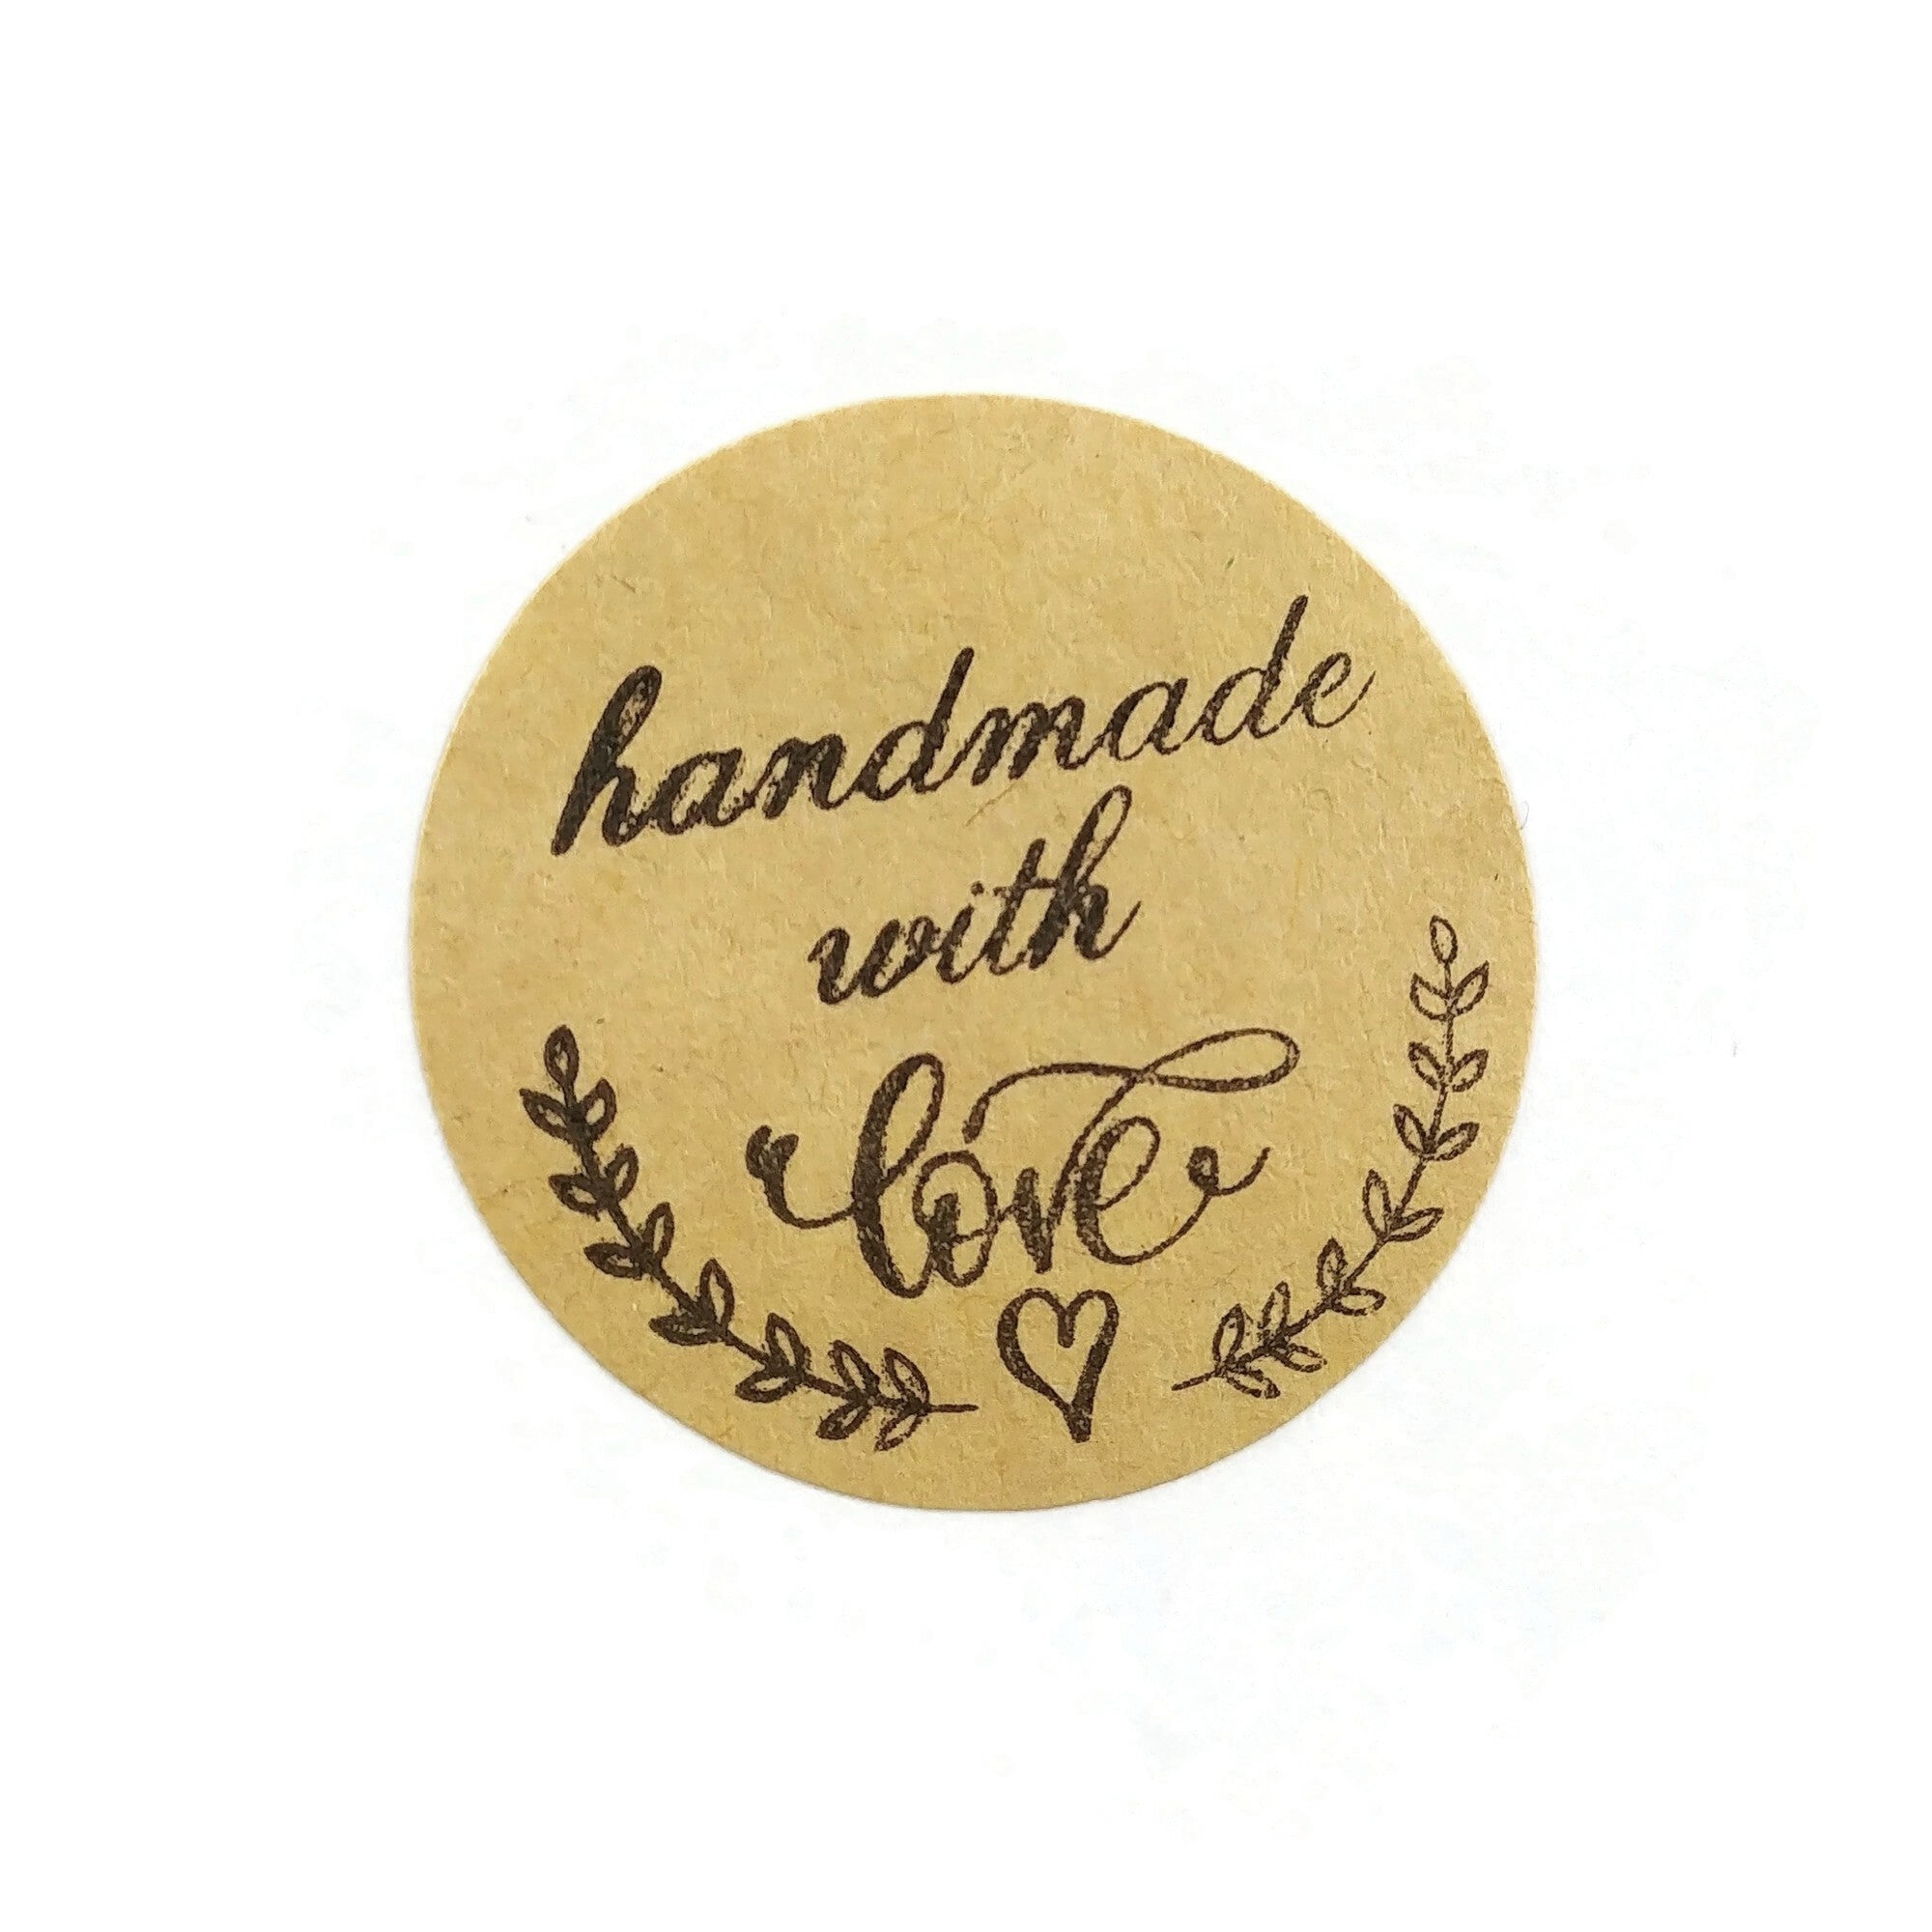 Handmade with love stickers